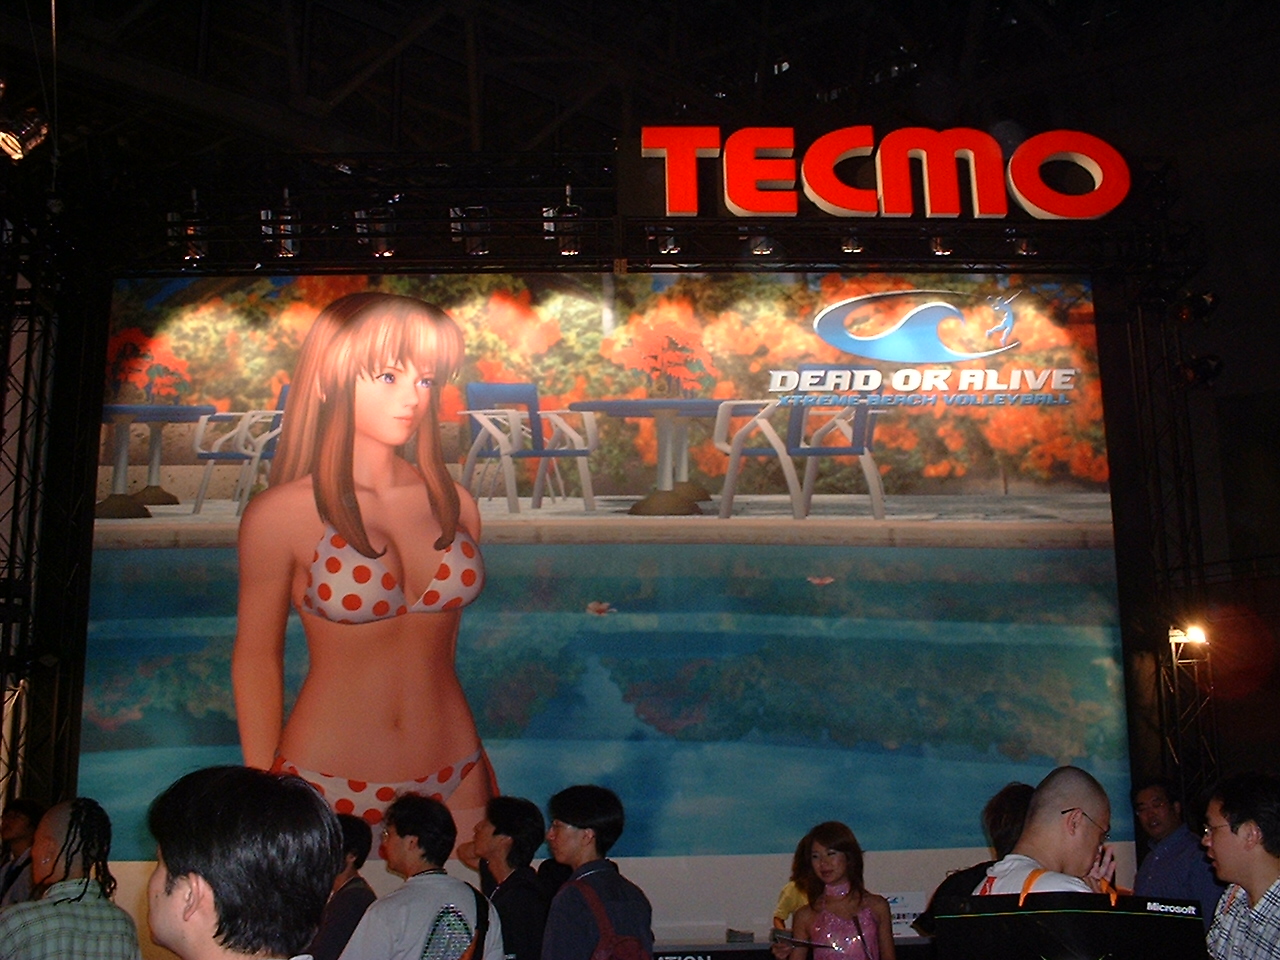 a very large sign of a white woman in a bikini under the tecmo logo